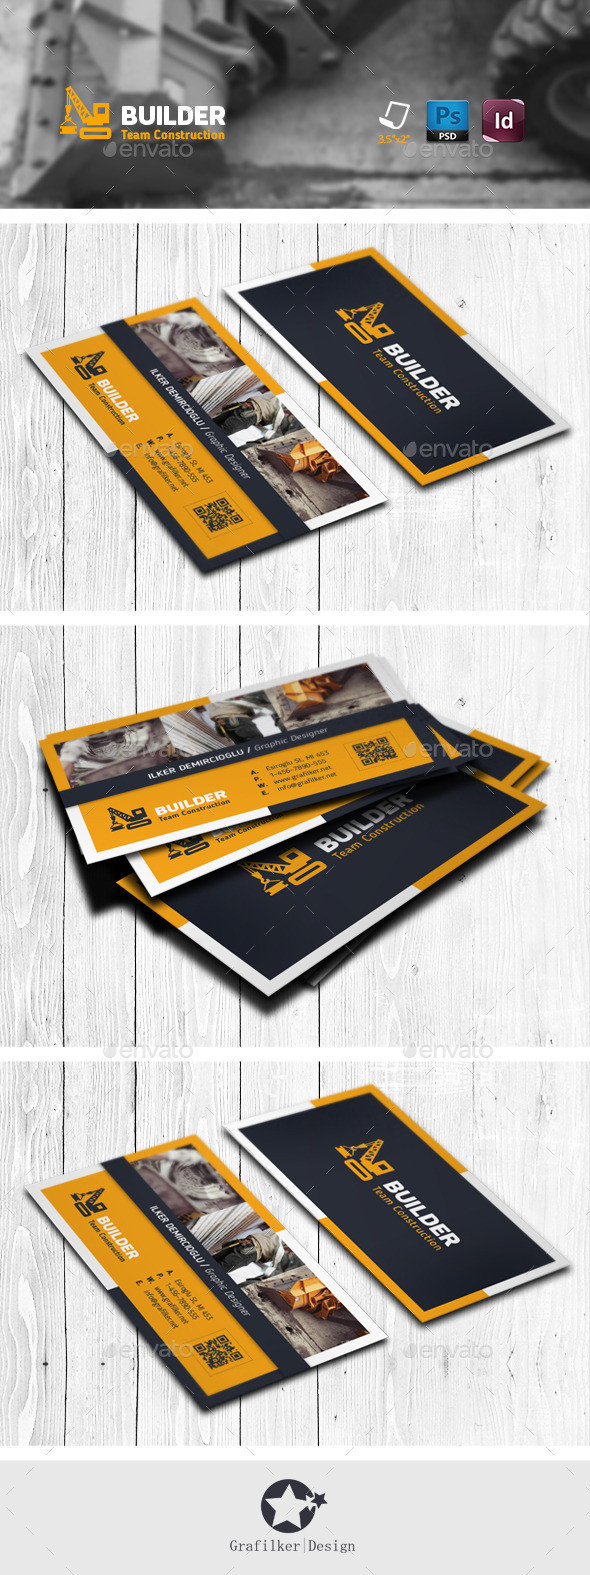 01 business card front p